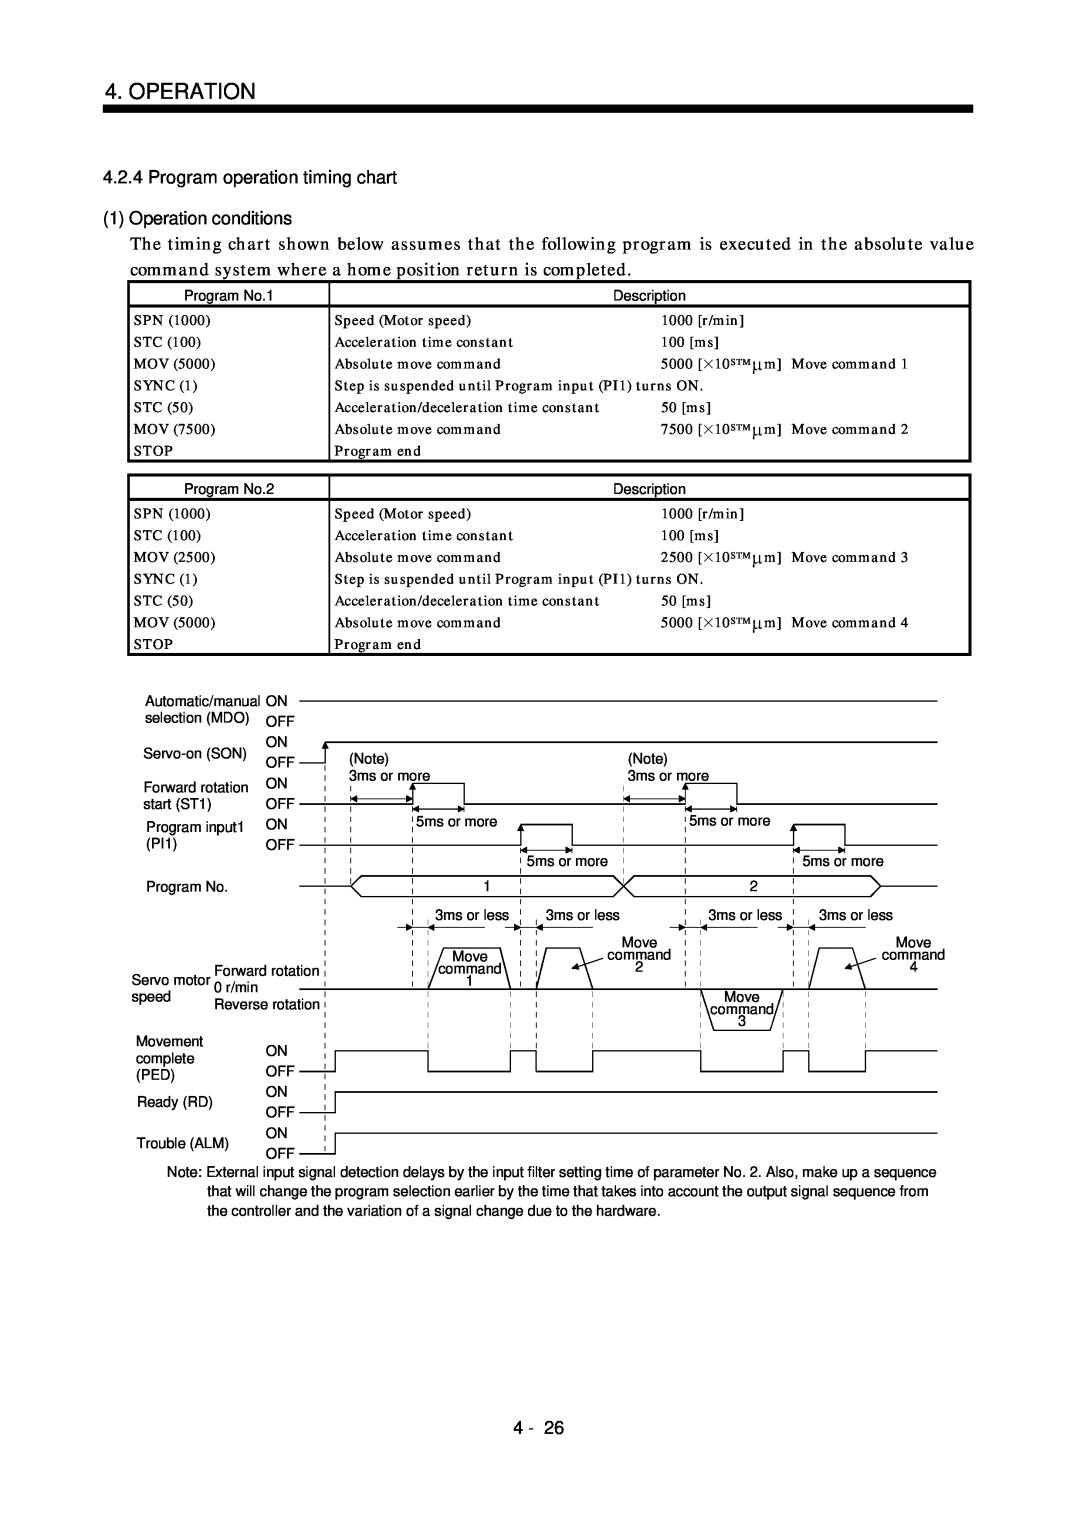 Mitsubishi Electronics MR-J2S- CL specifications Program operation timing chart, 1Operation conditions 